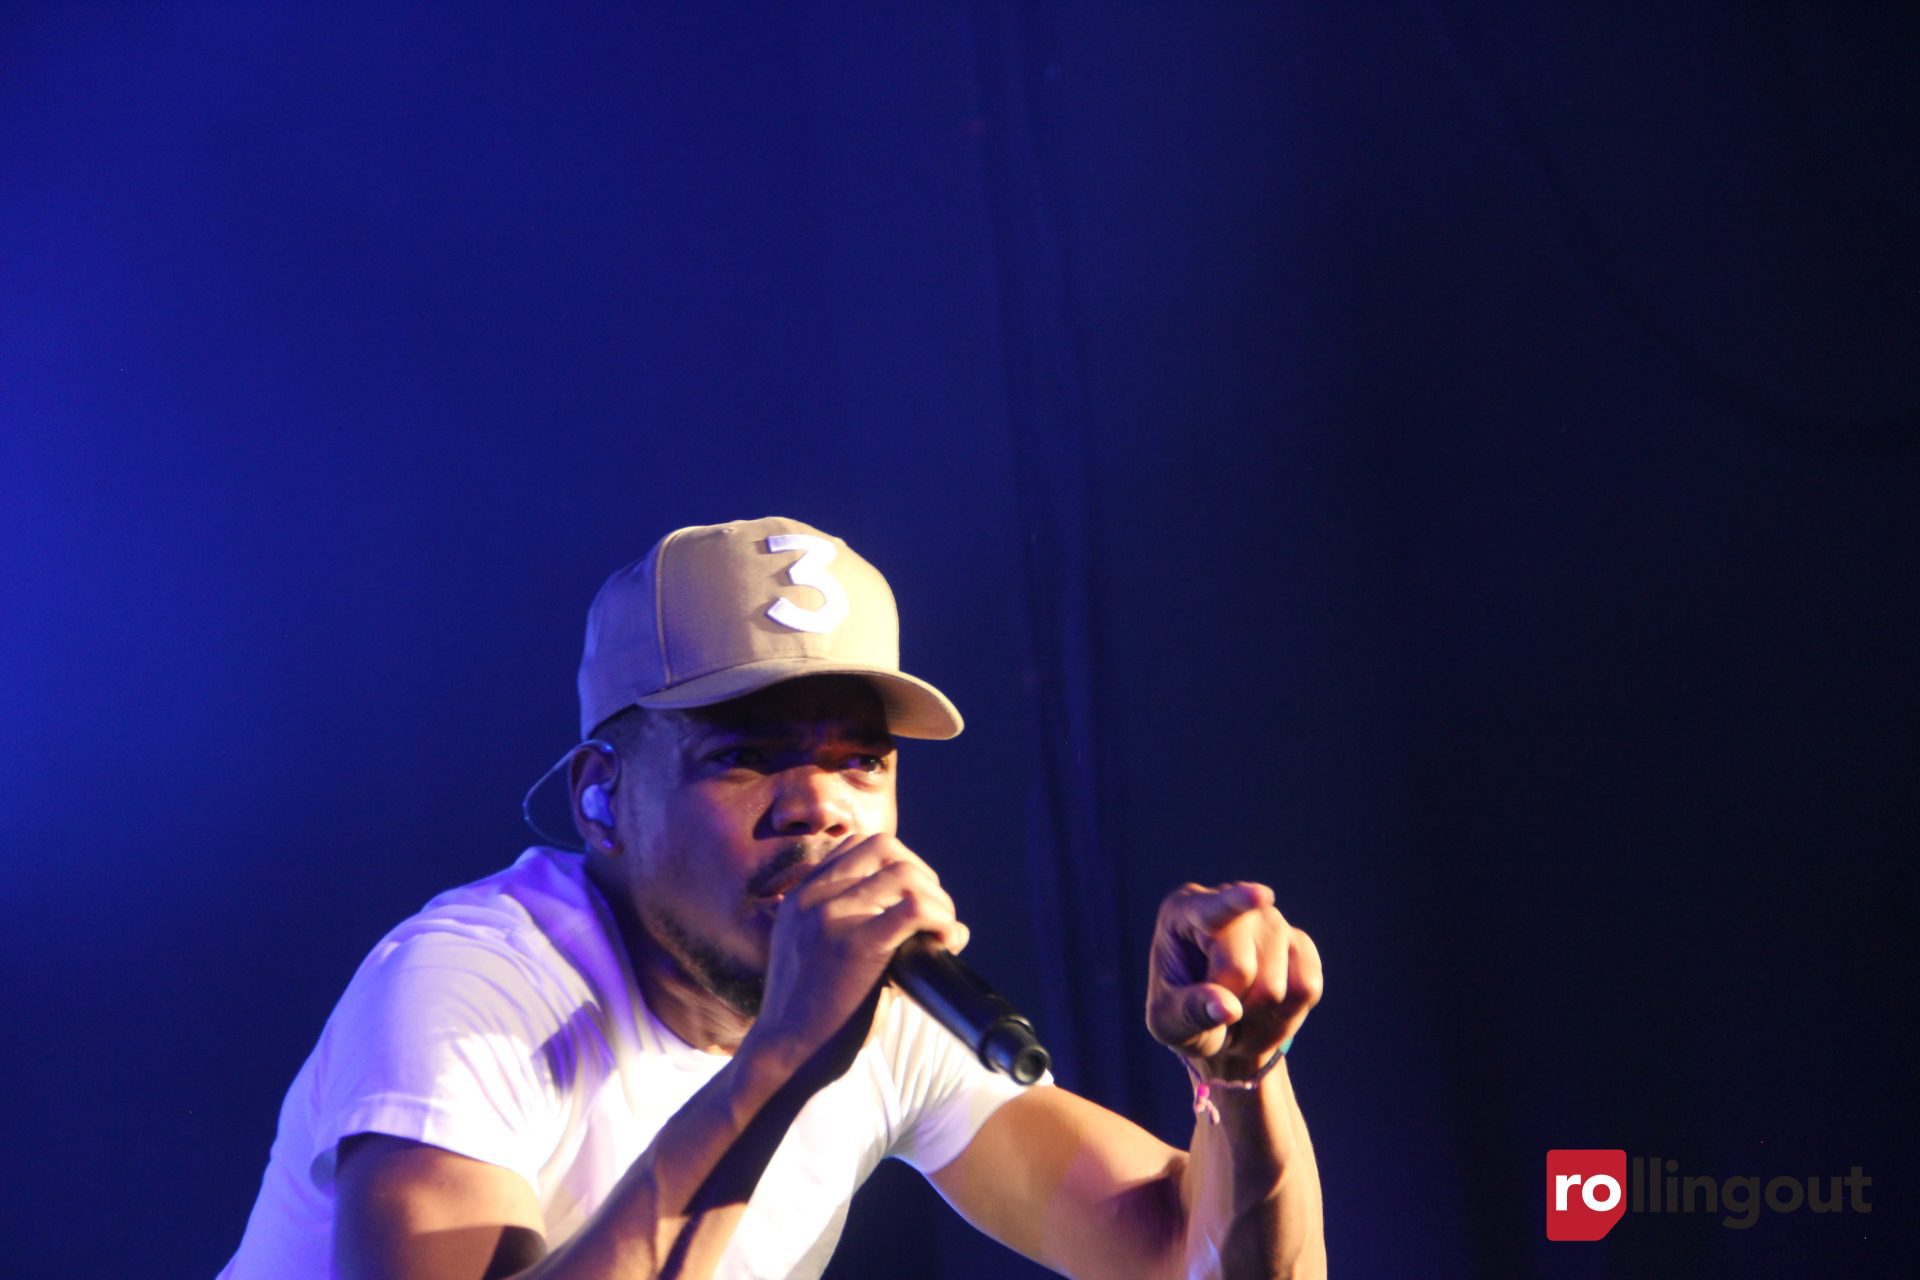 15 must-see images from Chance the Rapper's 'Be Encouraged' tour